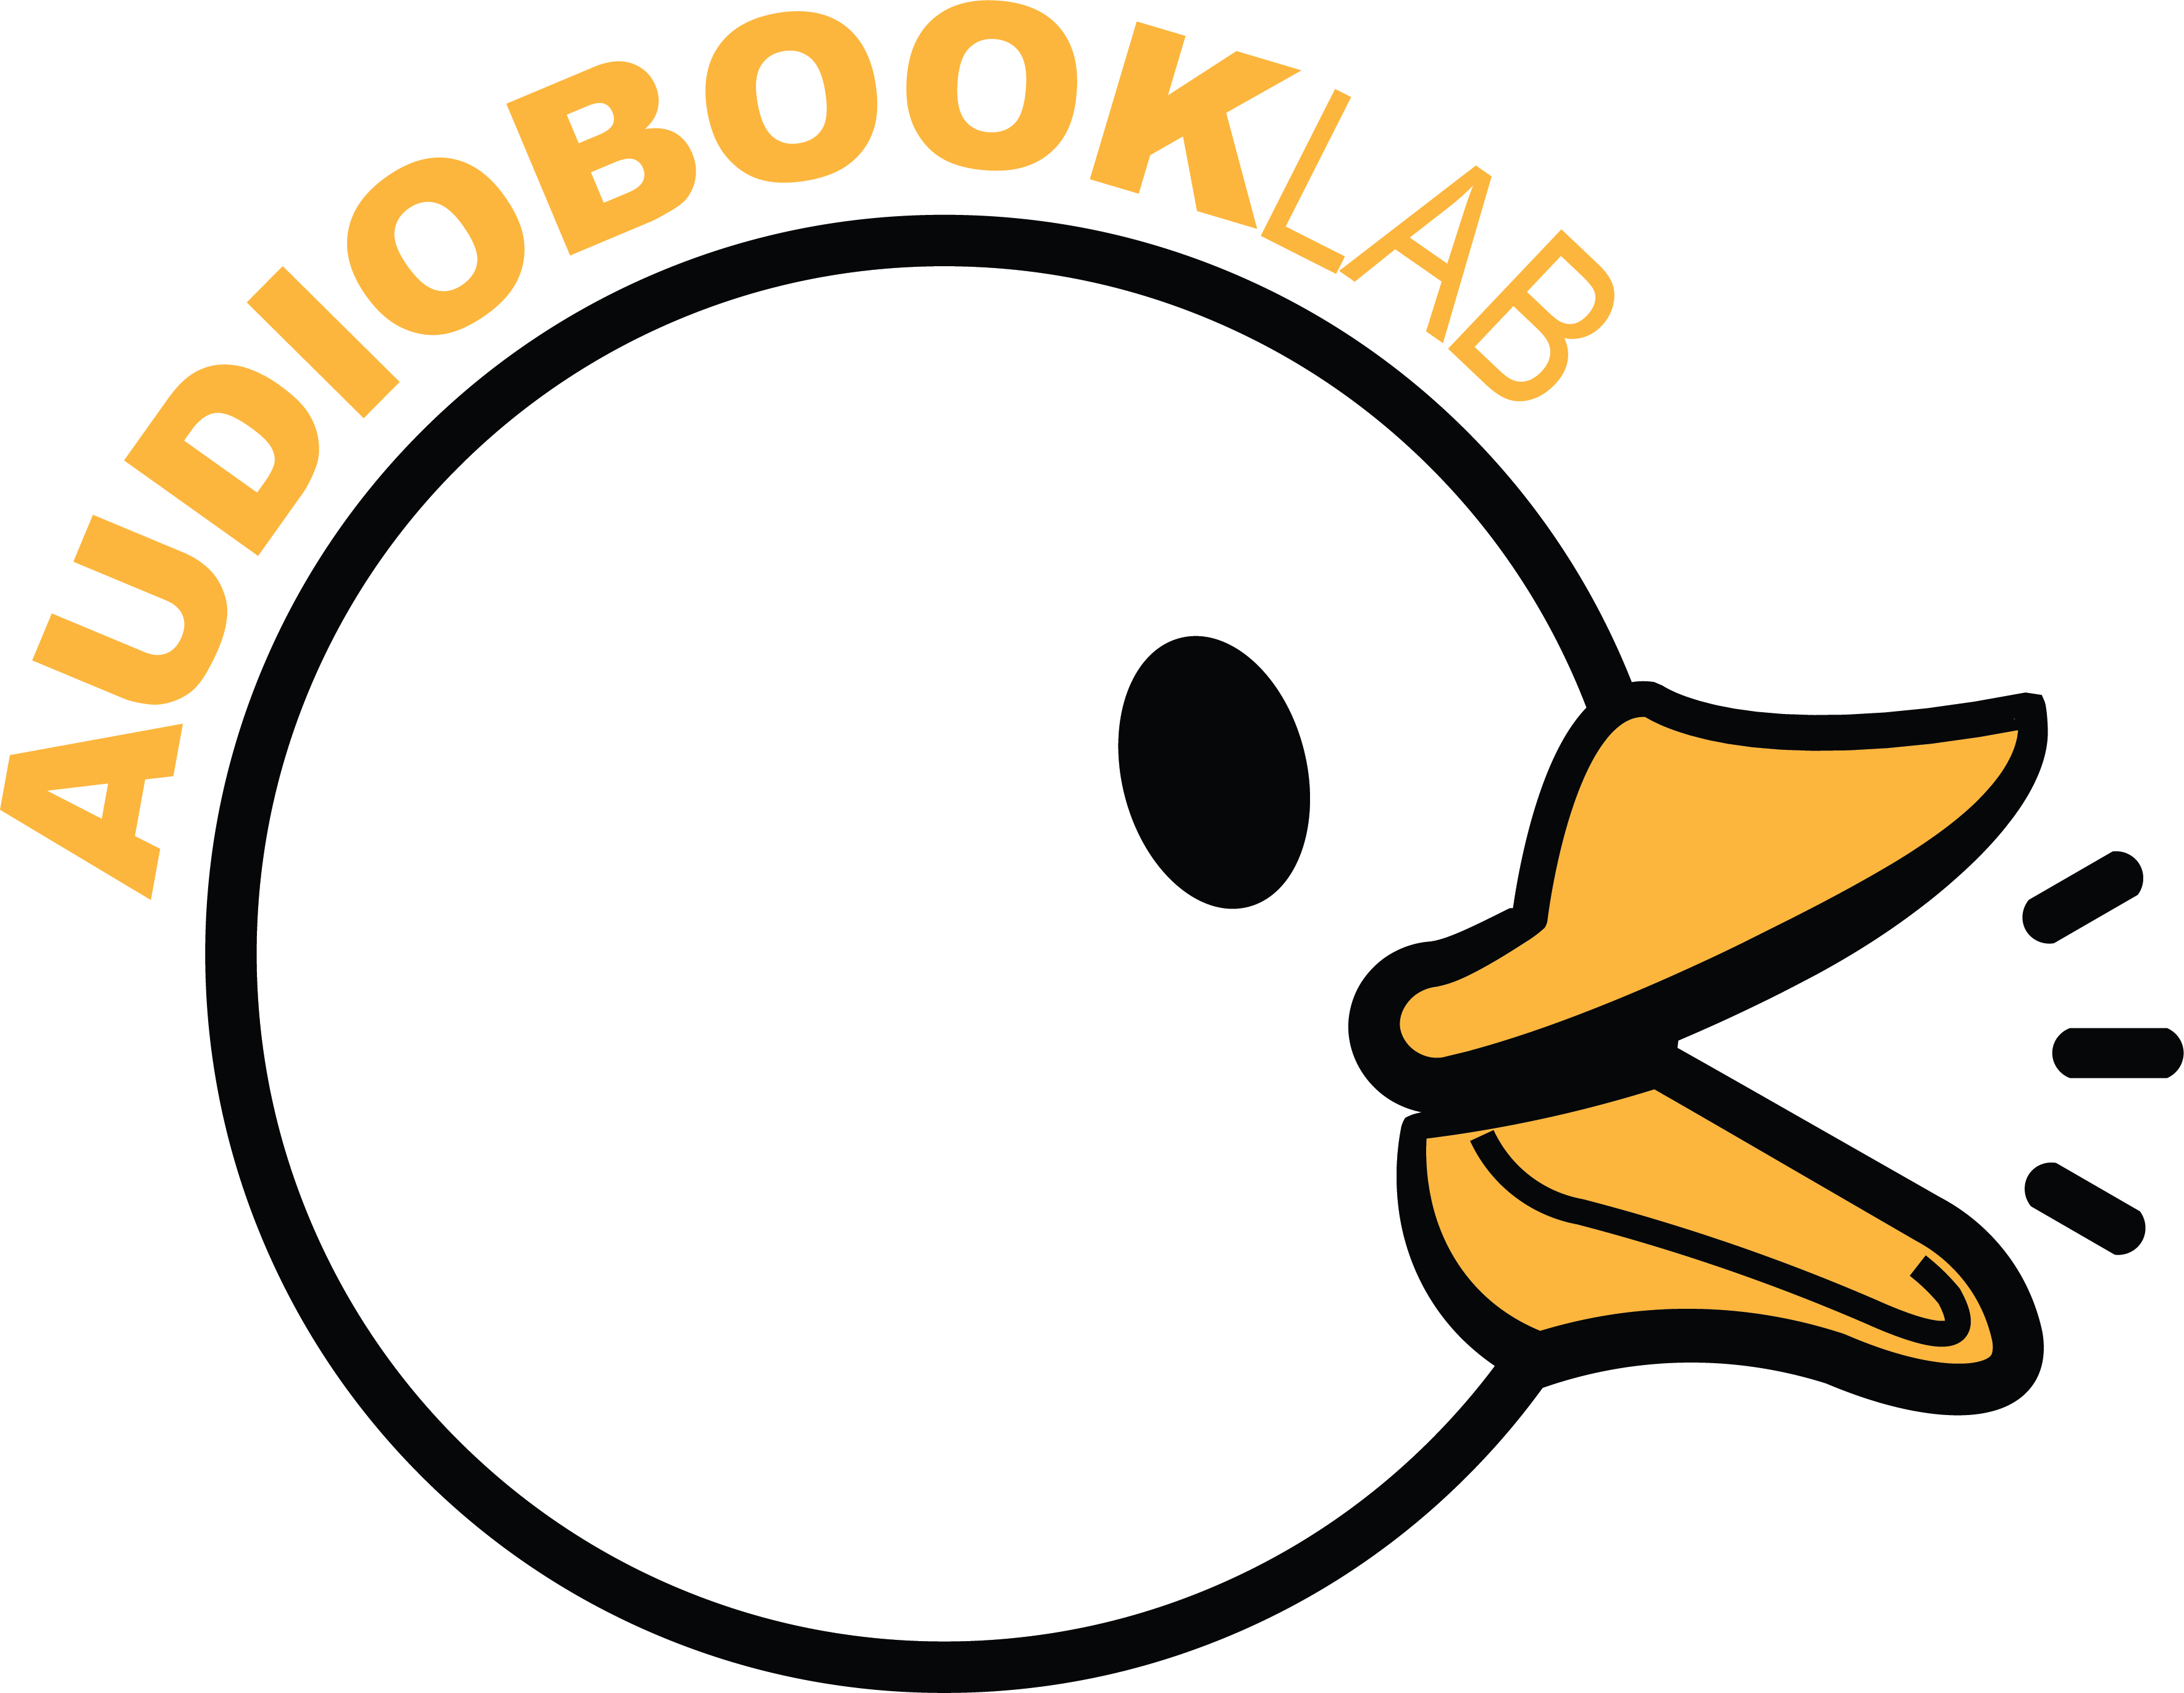 Audiobooklab - for self published authors